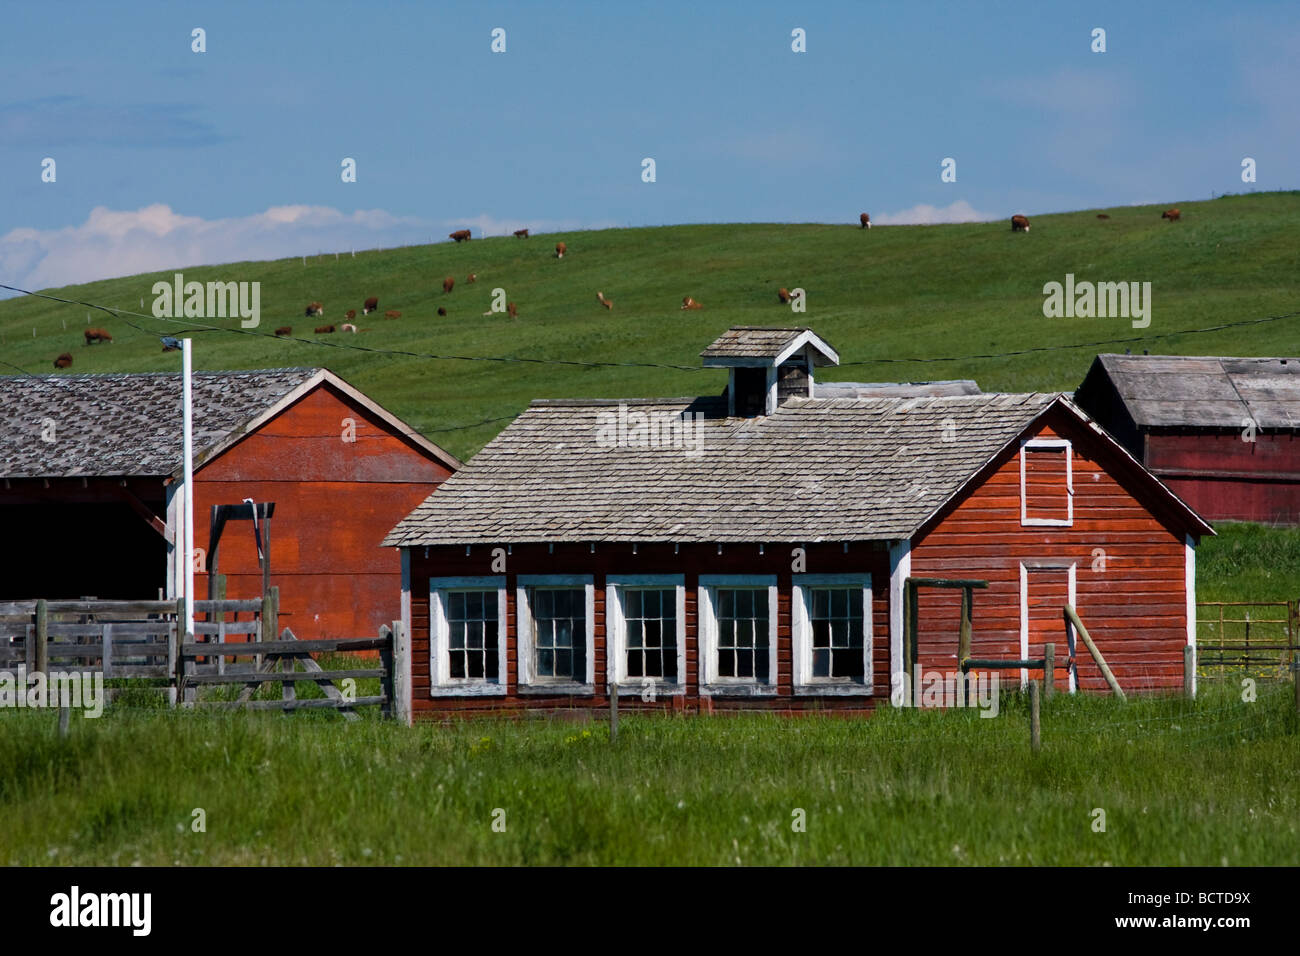 Weathered red buildings on a farm surrounded by green fields and blue sky on an afternoon in the summer. Stock Photo